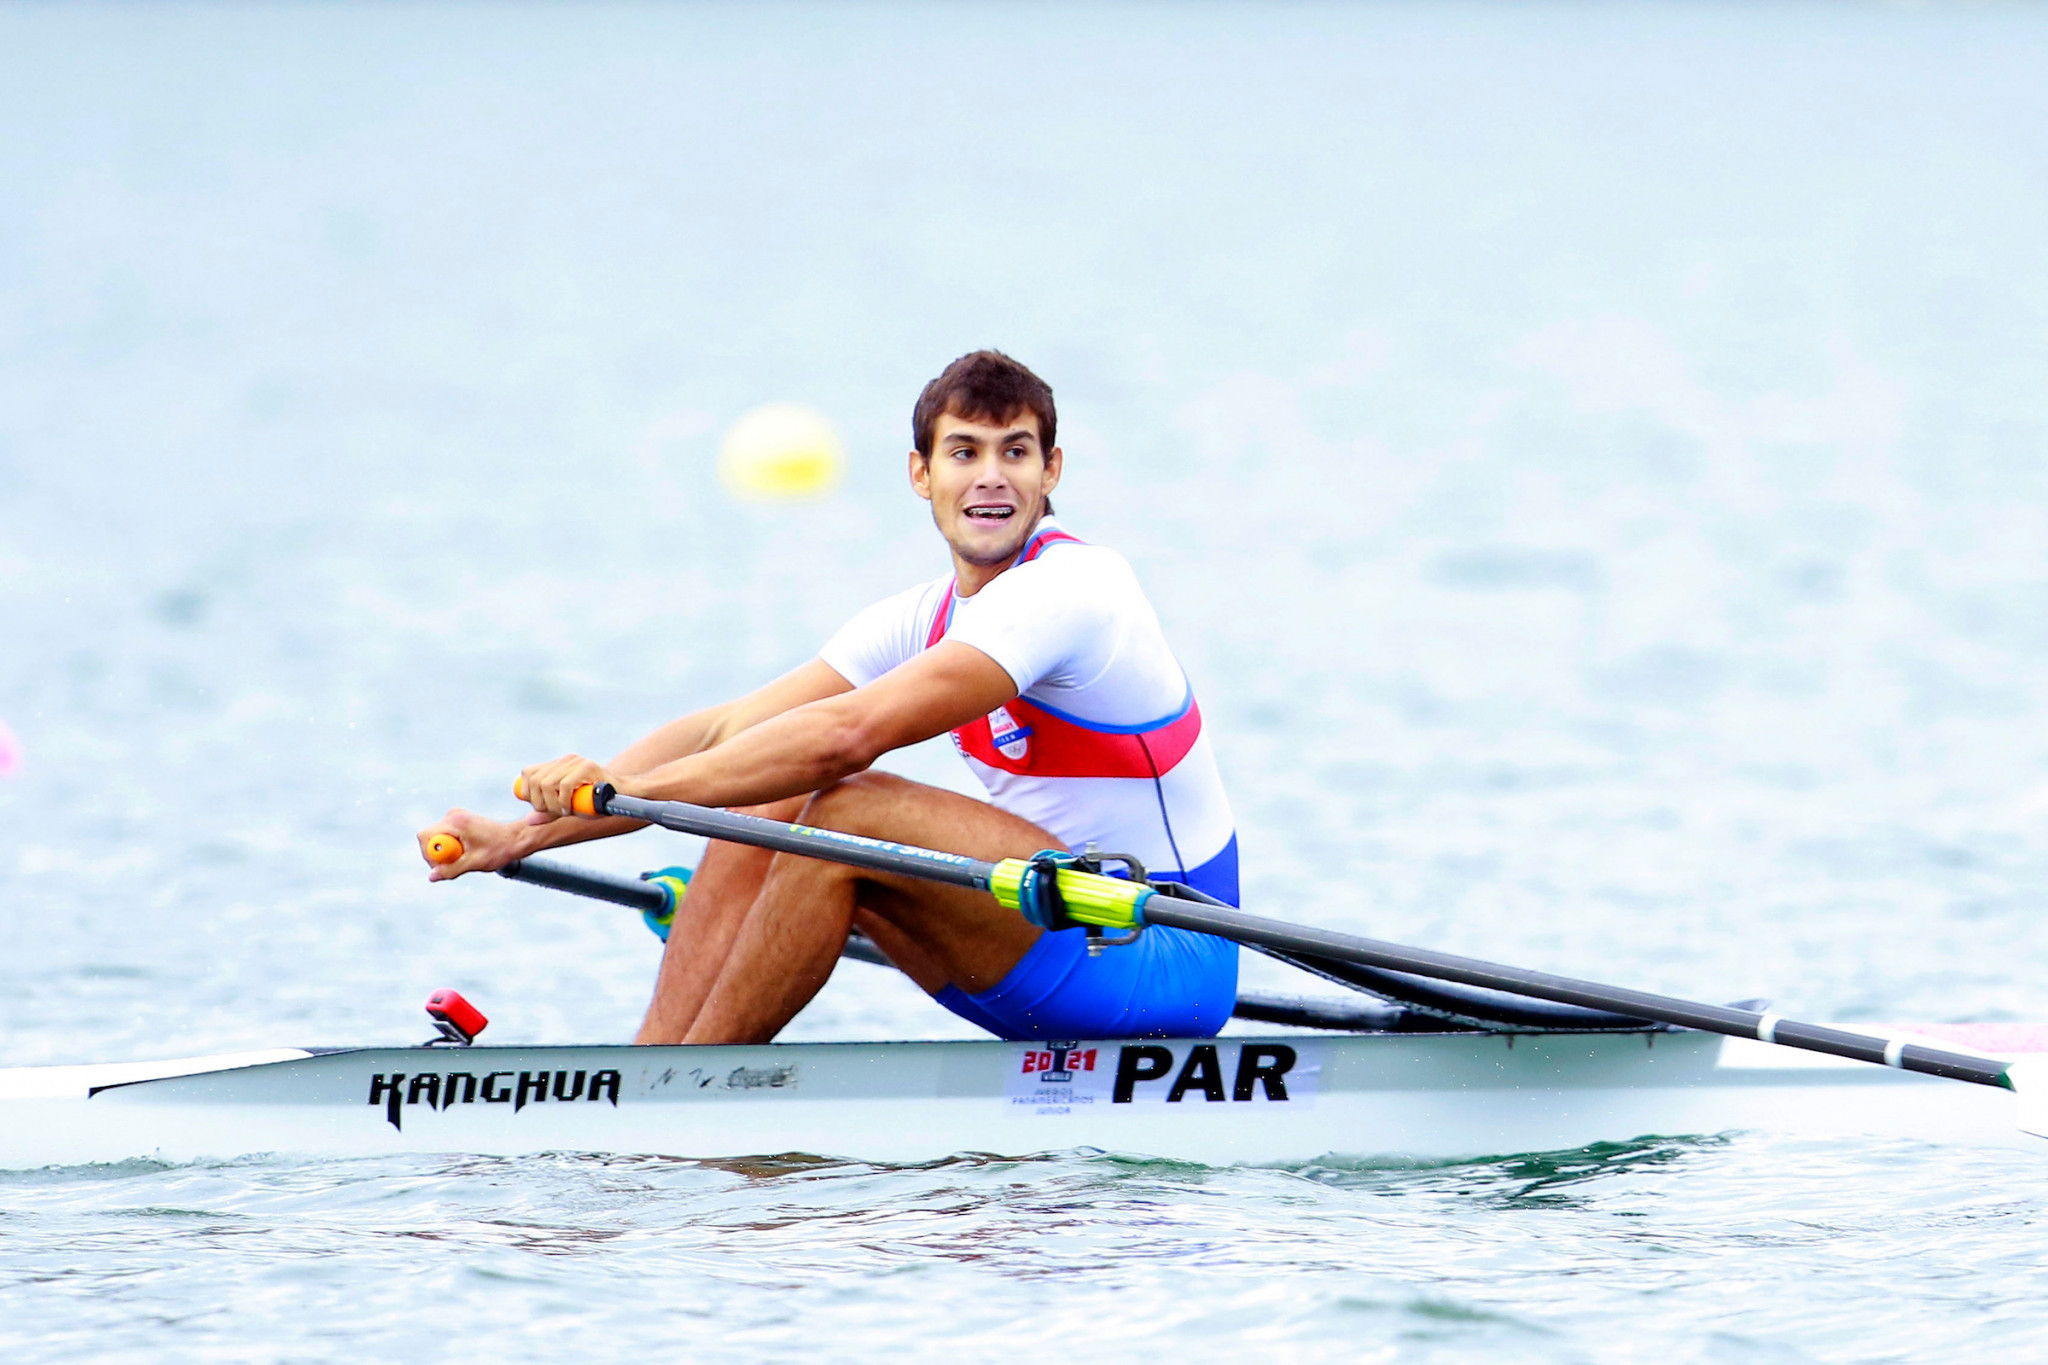 Javier Insfran secured Paraguay's first gold medal of the Games in the men's single sculls rowing event ©Agencia.Xpress Media